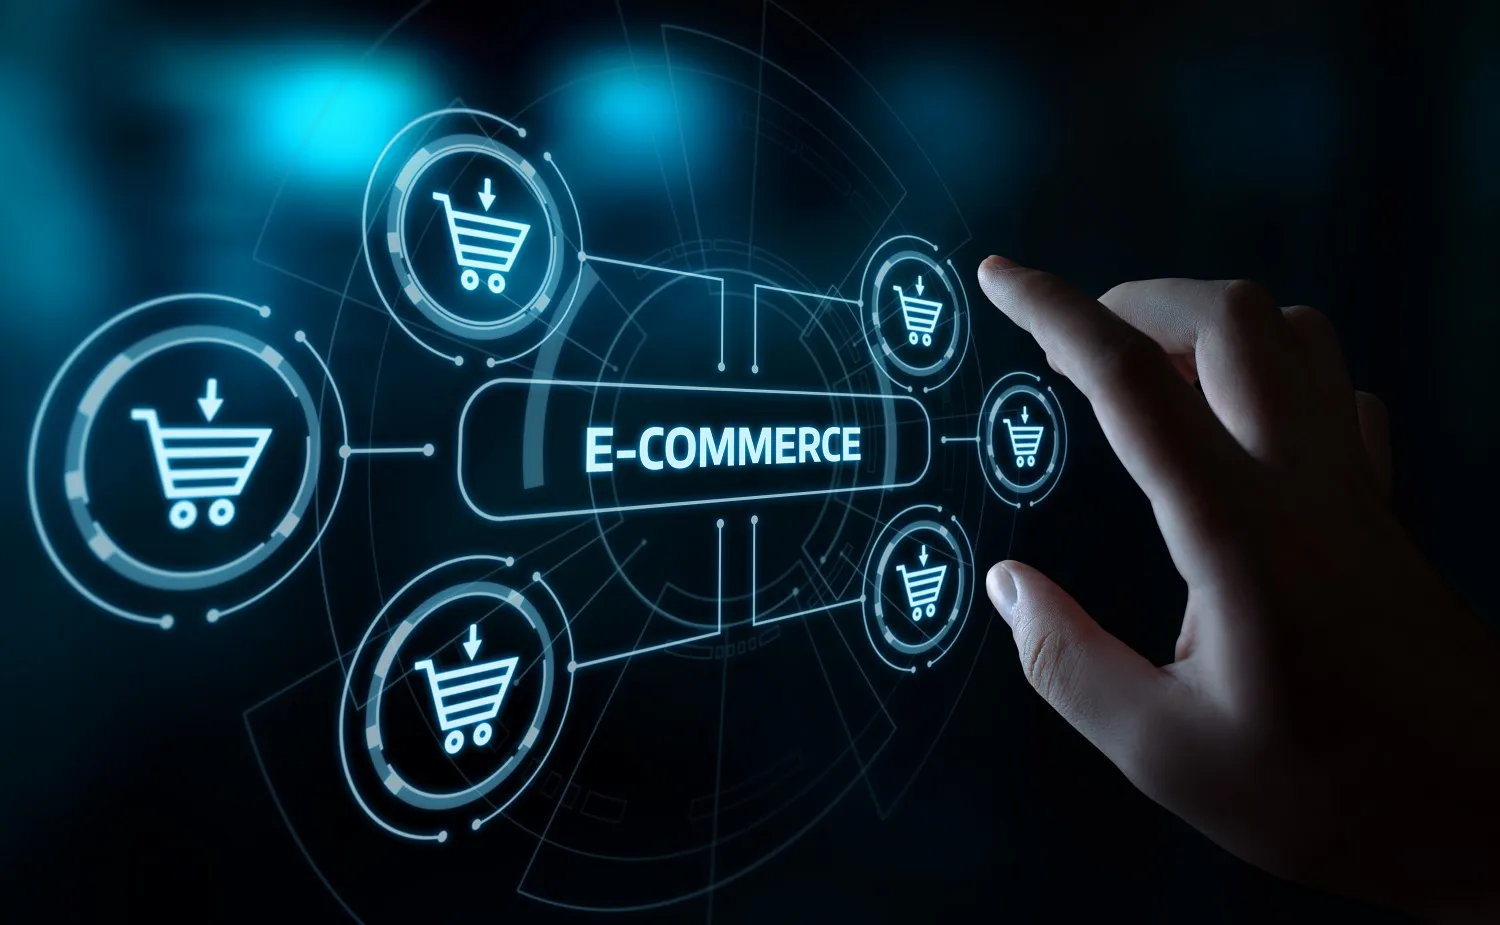 Odoo ERP: The Open Source eCommerce Platform You Were Looking For